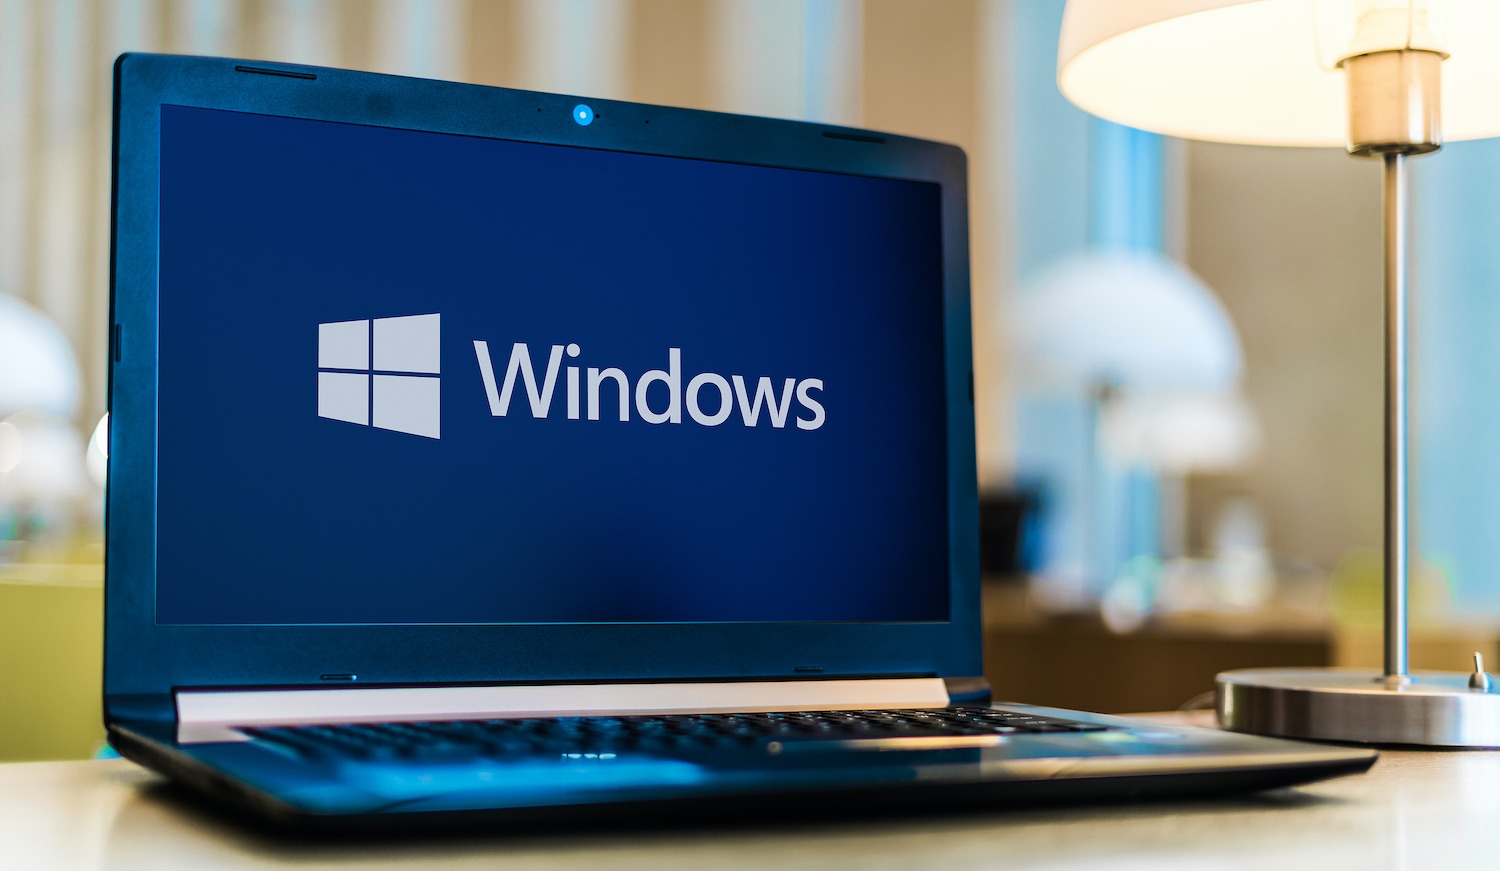 Windows 365 Was Just Launched. What are the Pros & Cons?